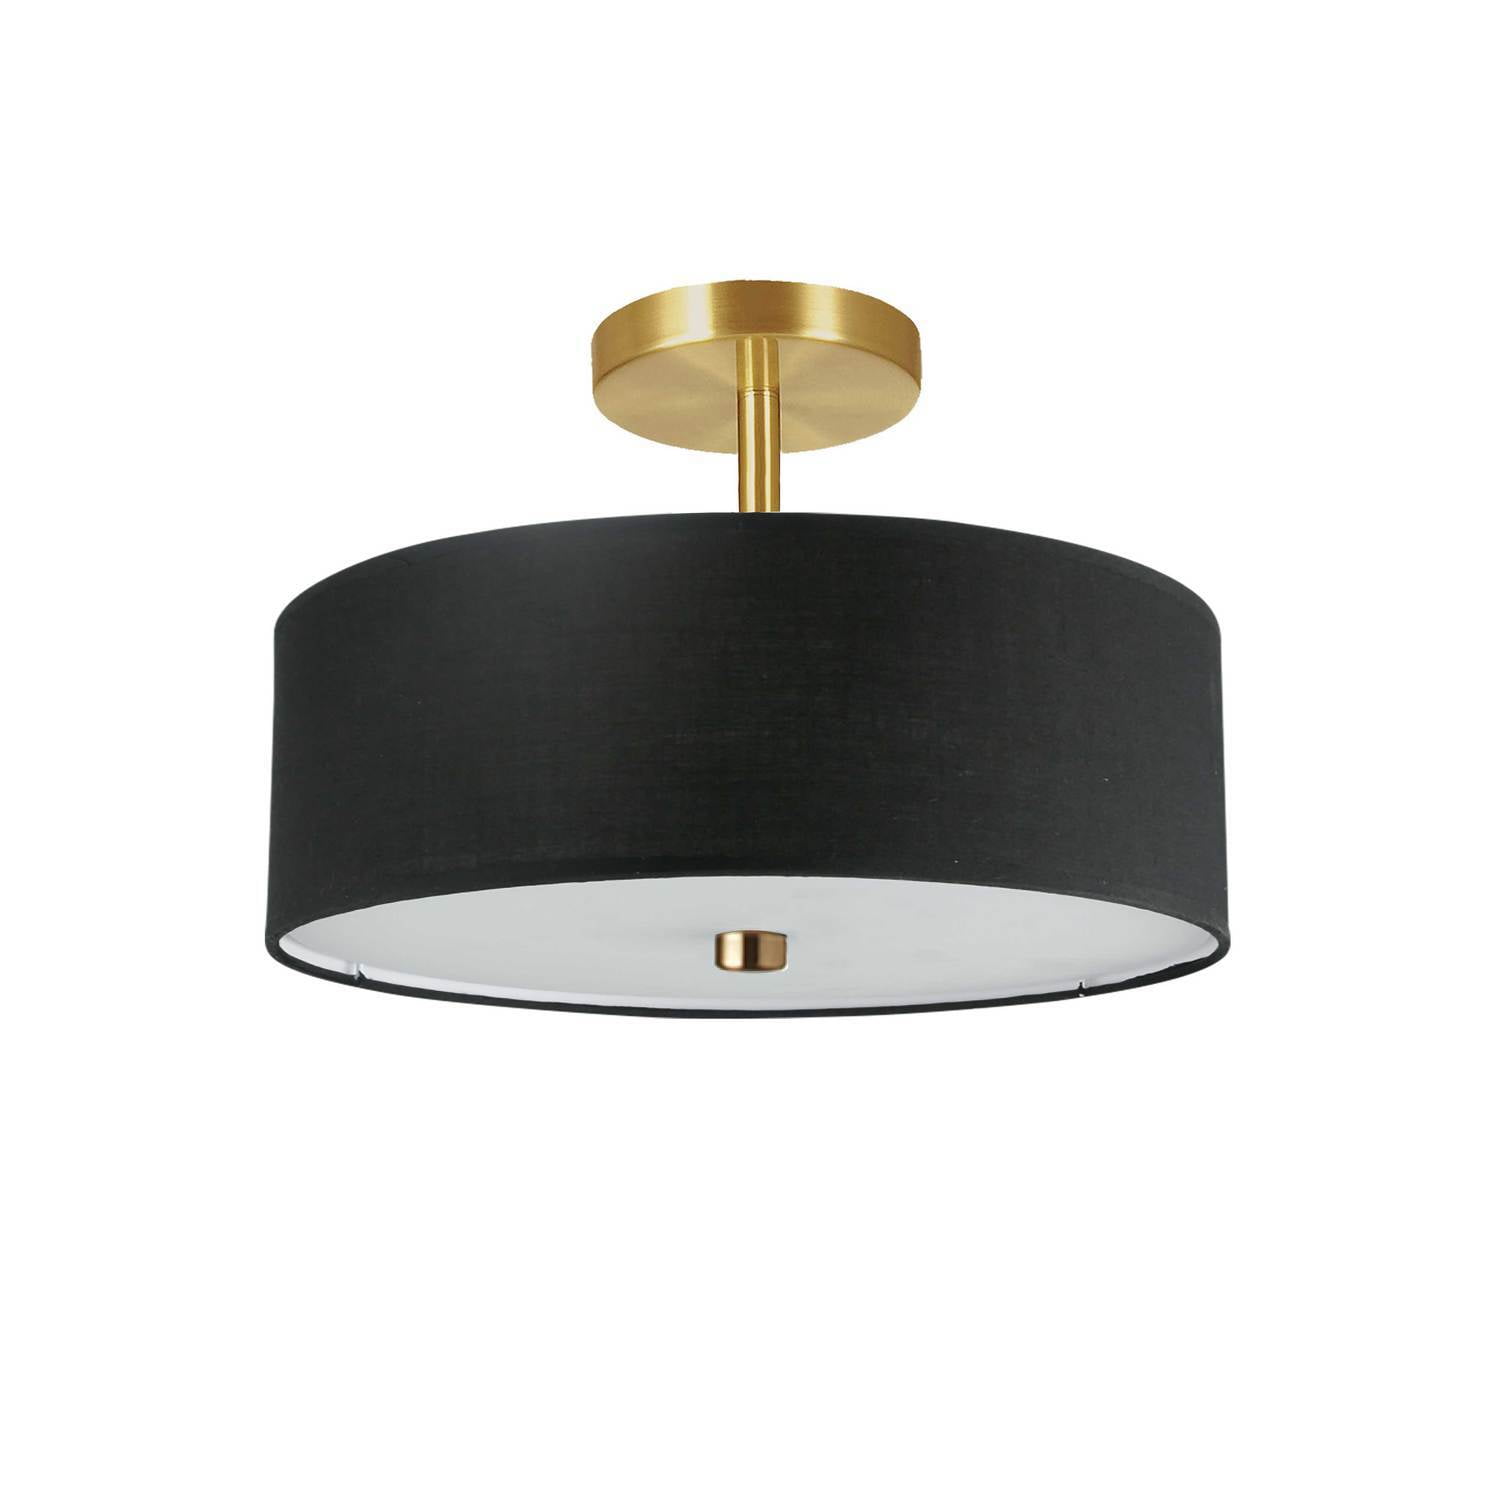 Picture of Dainolite 571-143SF-AGB-BK 3 Light Incandescent Semi-Flush Mount, Aged Brass with Black Shade